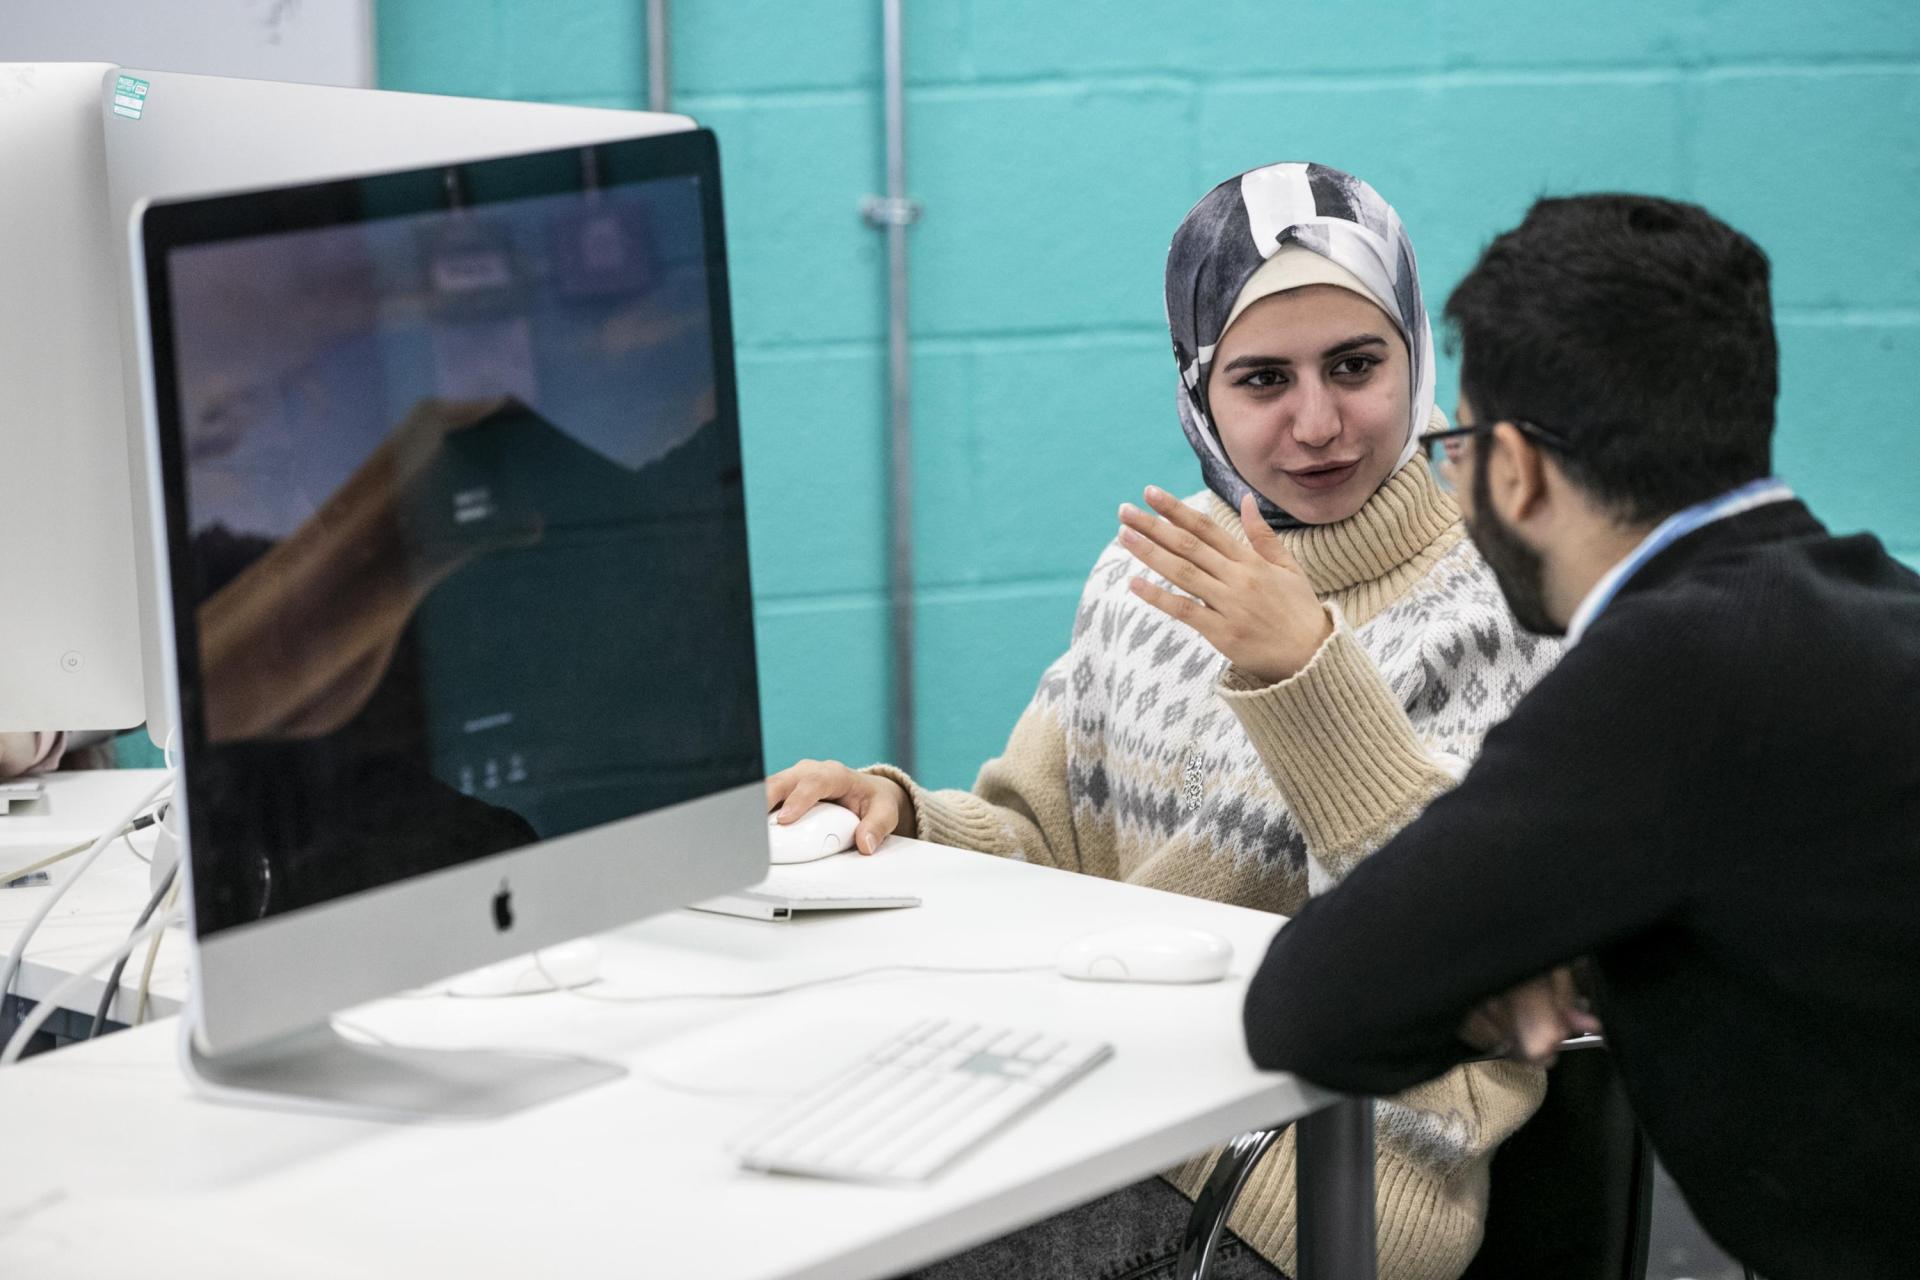 A female student with a head covering explaining to a male student in front of a computer